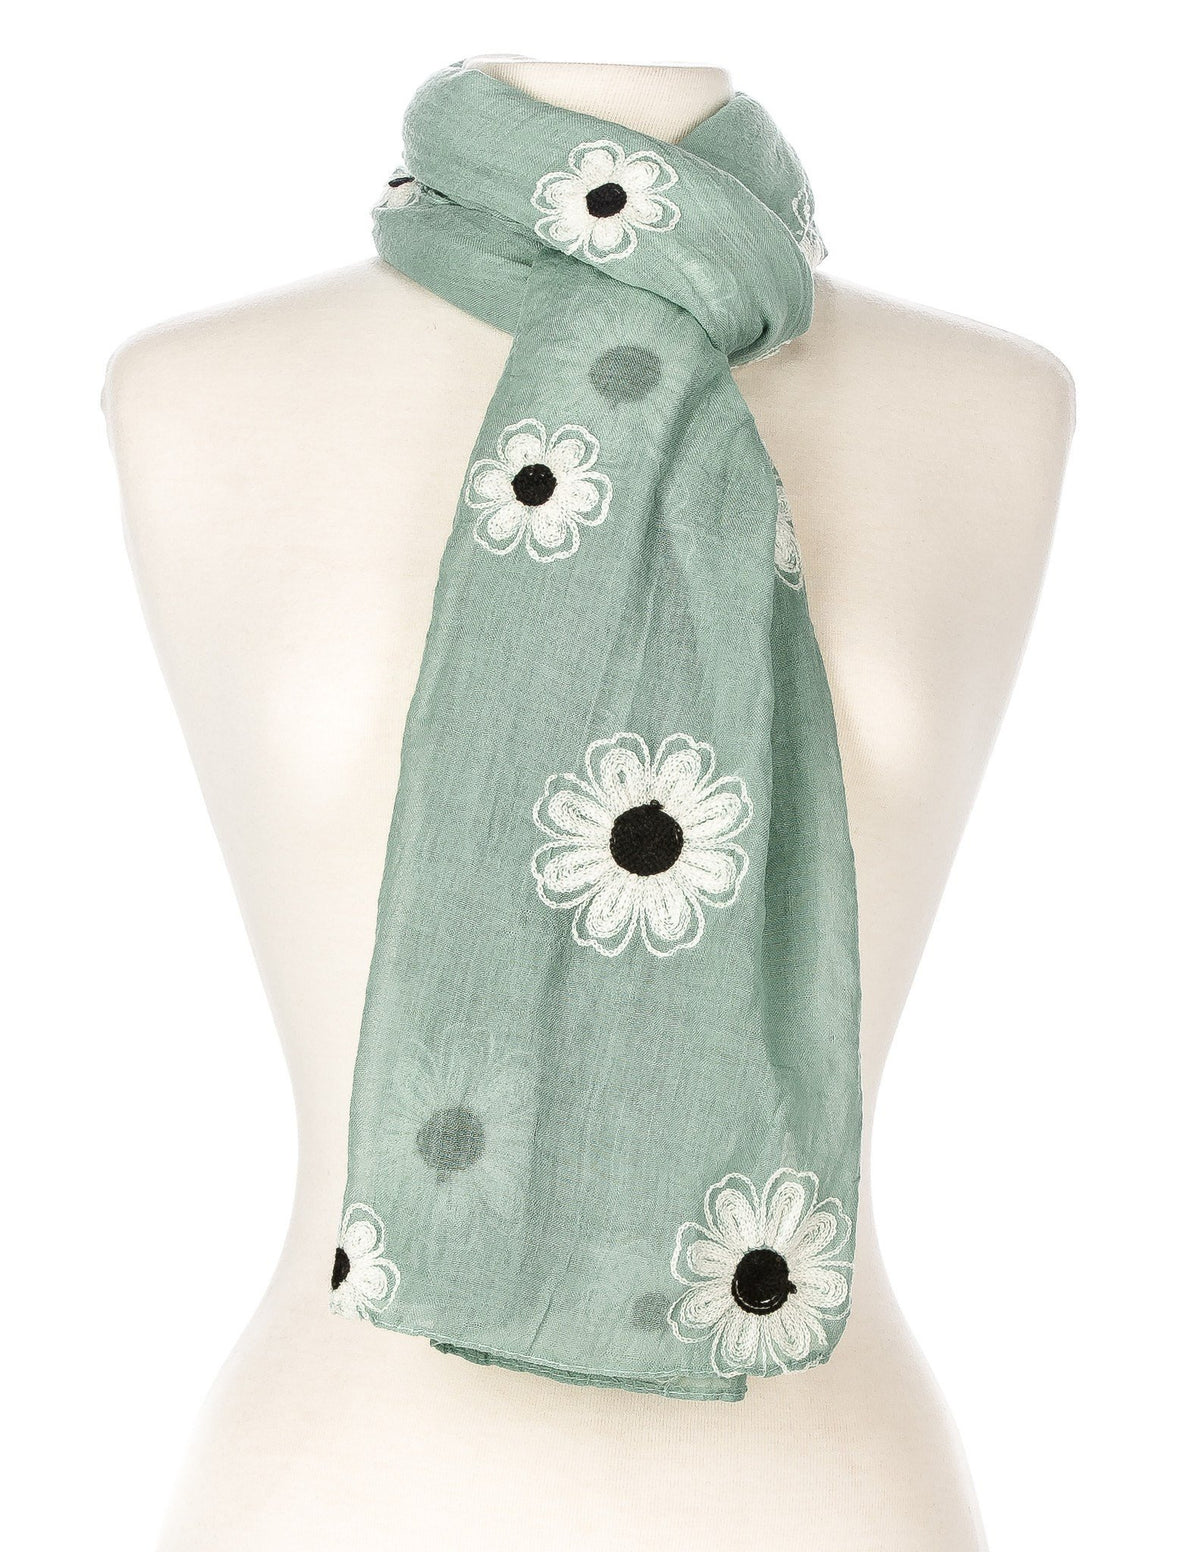 Embroidered Floral Spring Scarf - Aqua